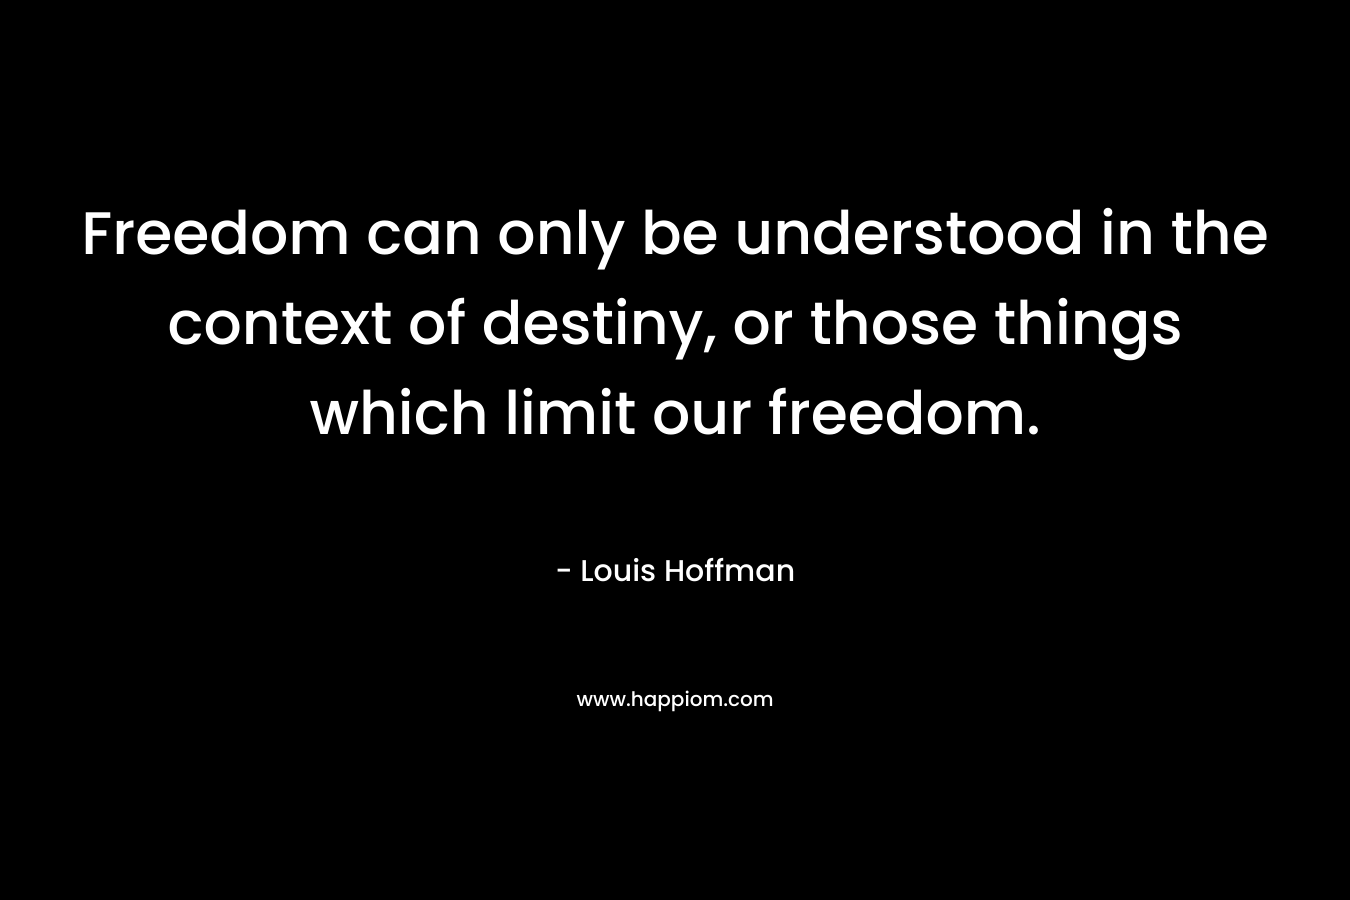 Freedom can only be understood in the context of destiny, or those things which limit our freedom.